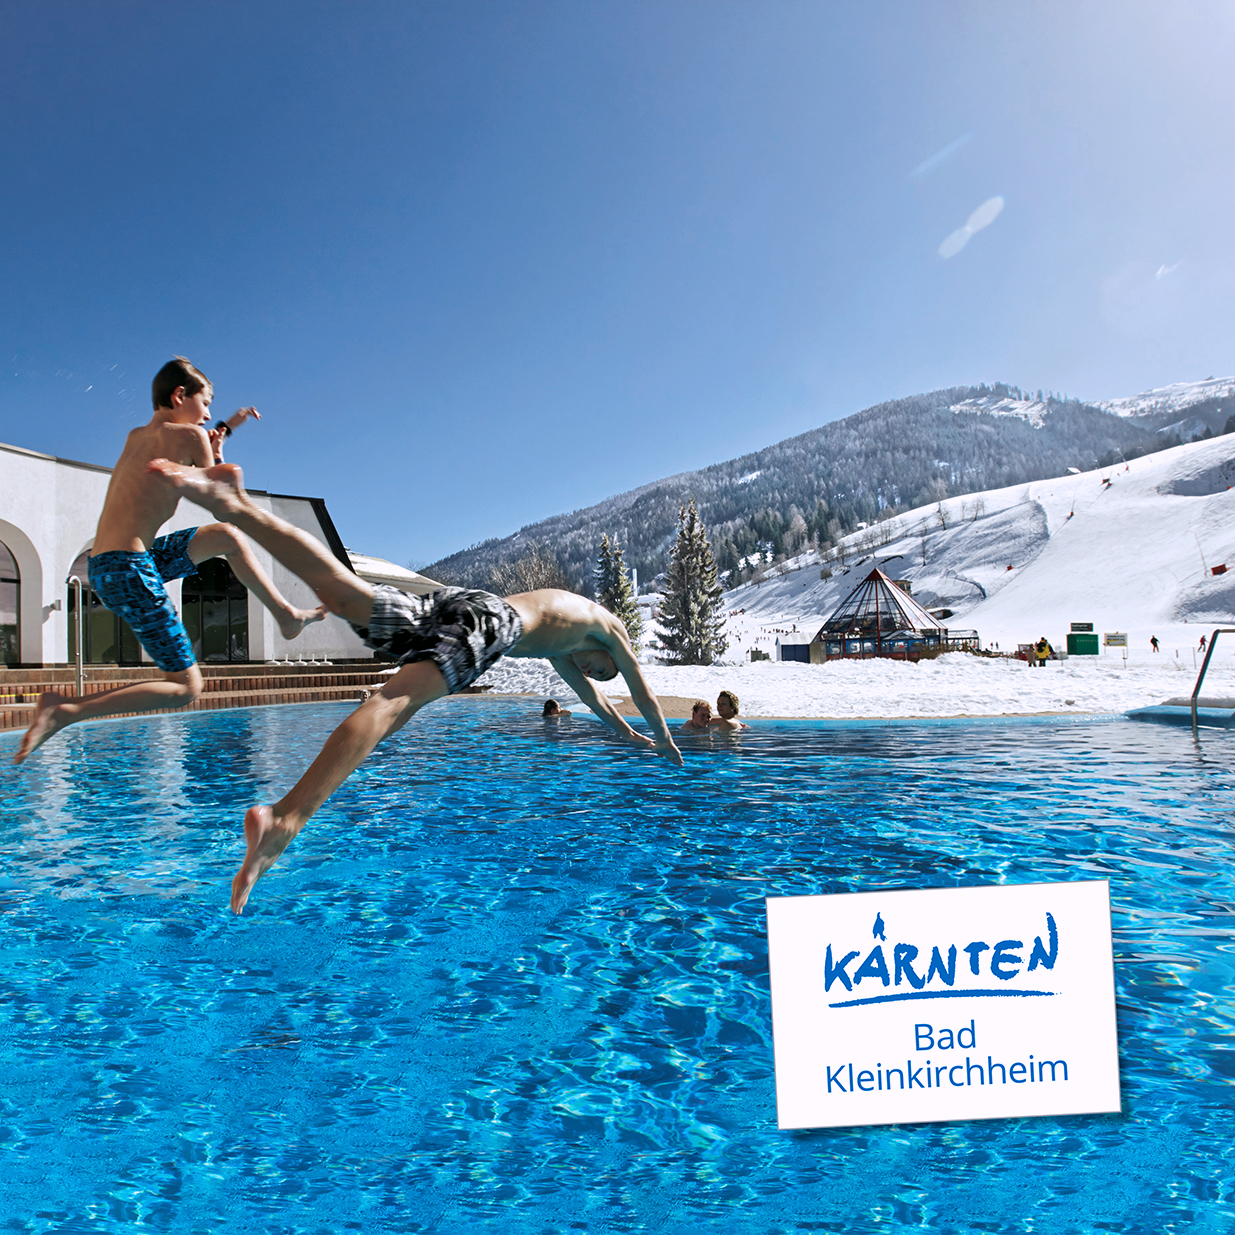 Ski-Thermen-Weeks: Sun skiing with thermal spa enjoyment in Bad Kleinkirchheim. Winter vacation on the sunny side of the Alps